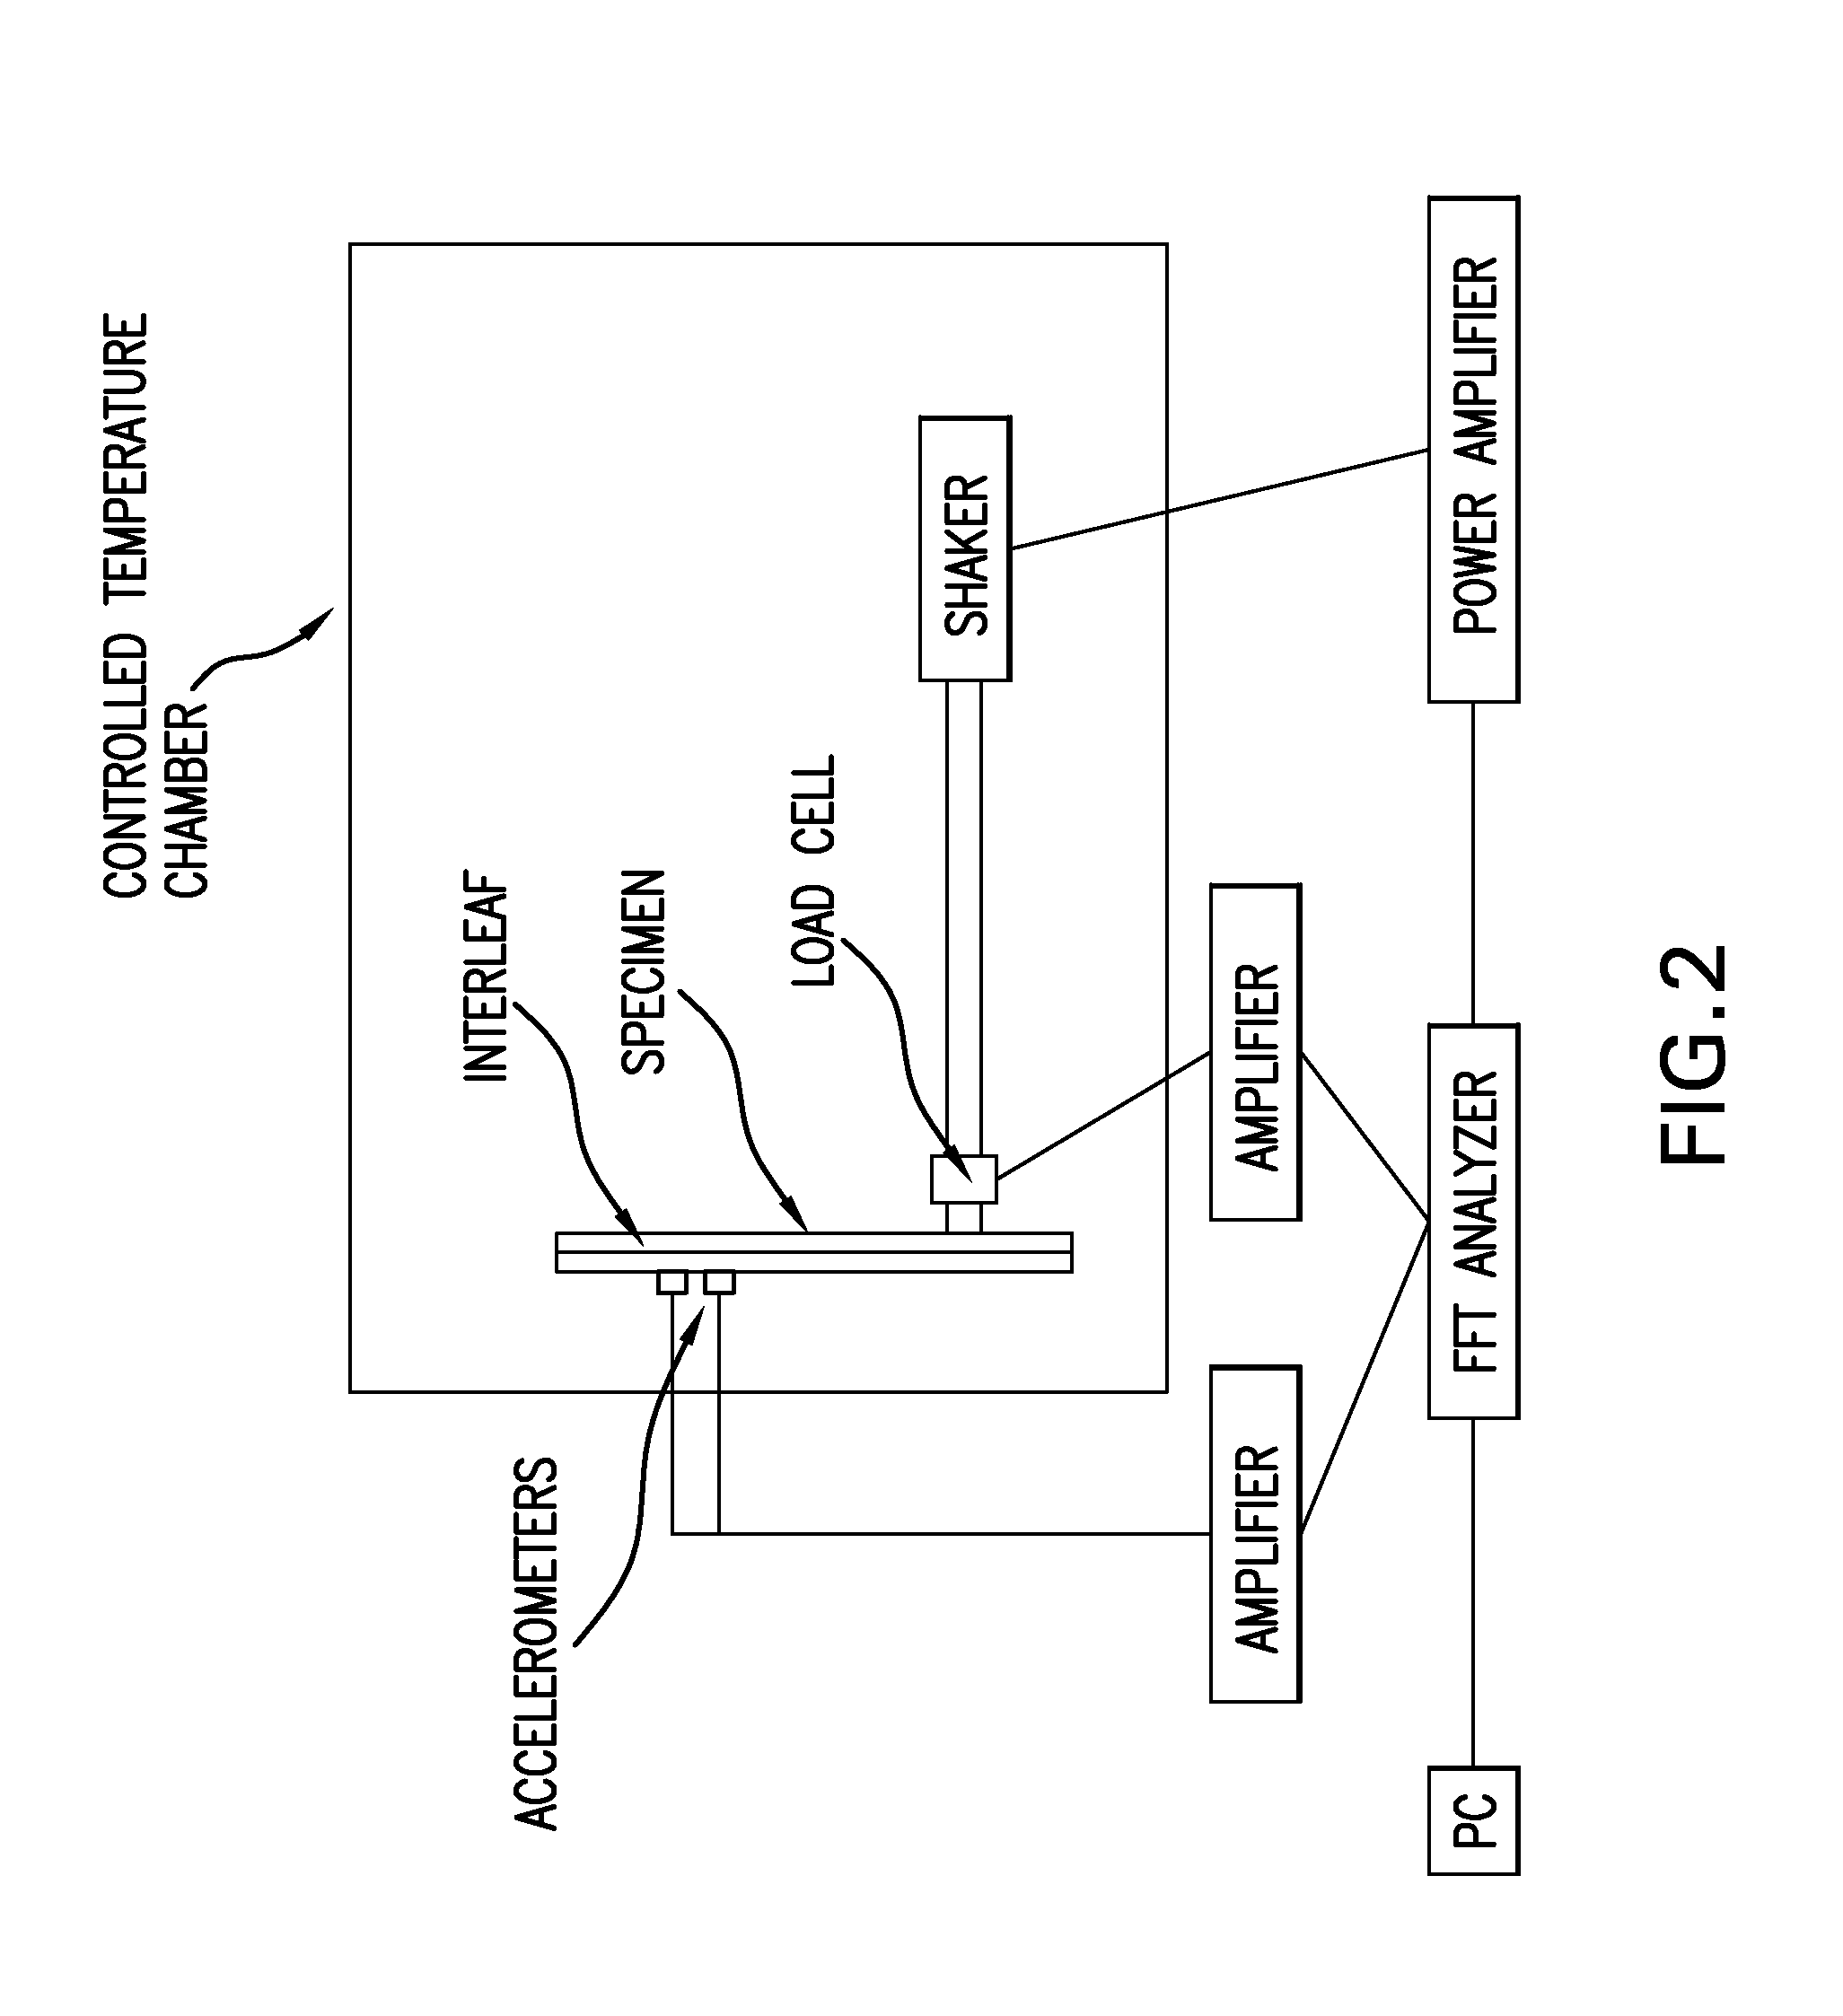 Structural composite material with improved acoustic and vibrational damping properties